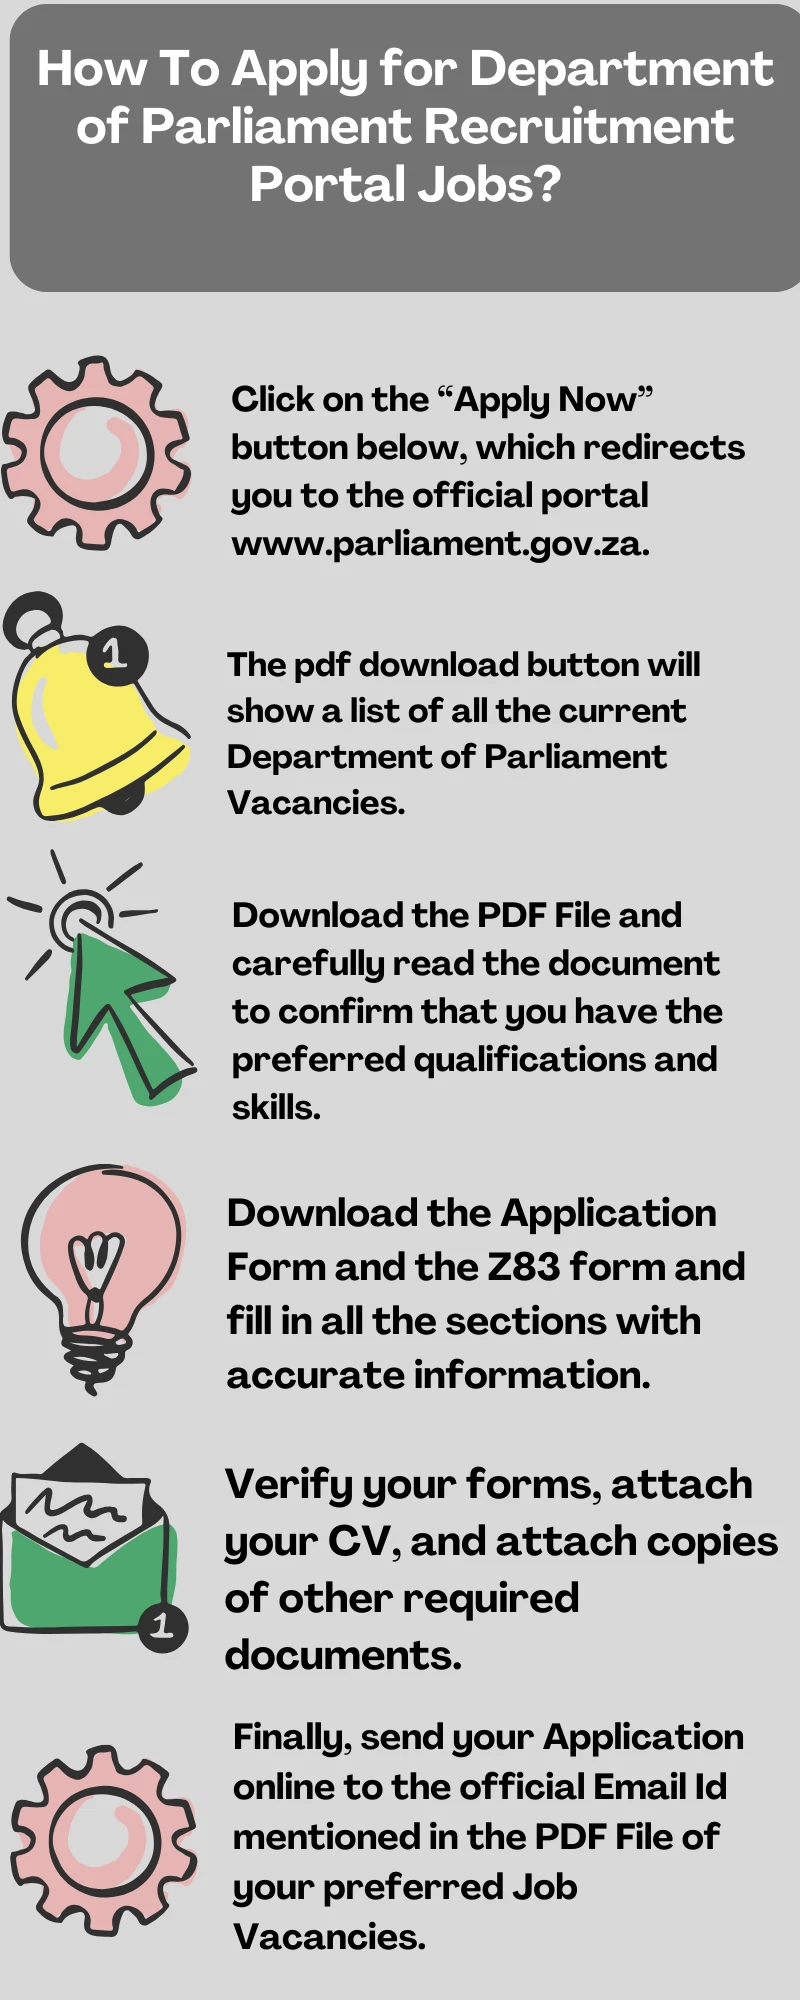 How To Apply for Department of Parliament Recruitment Portal Jobs?